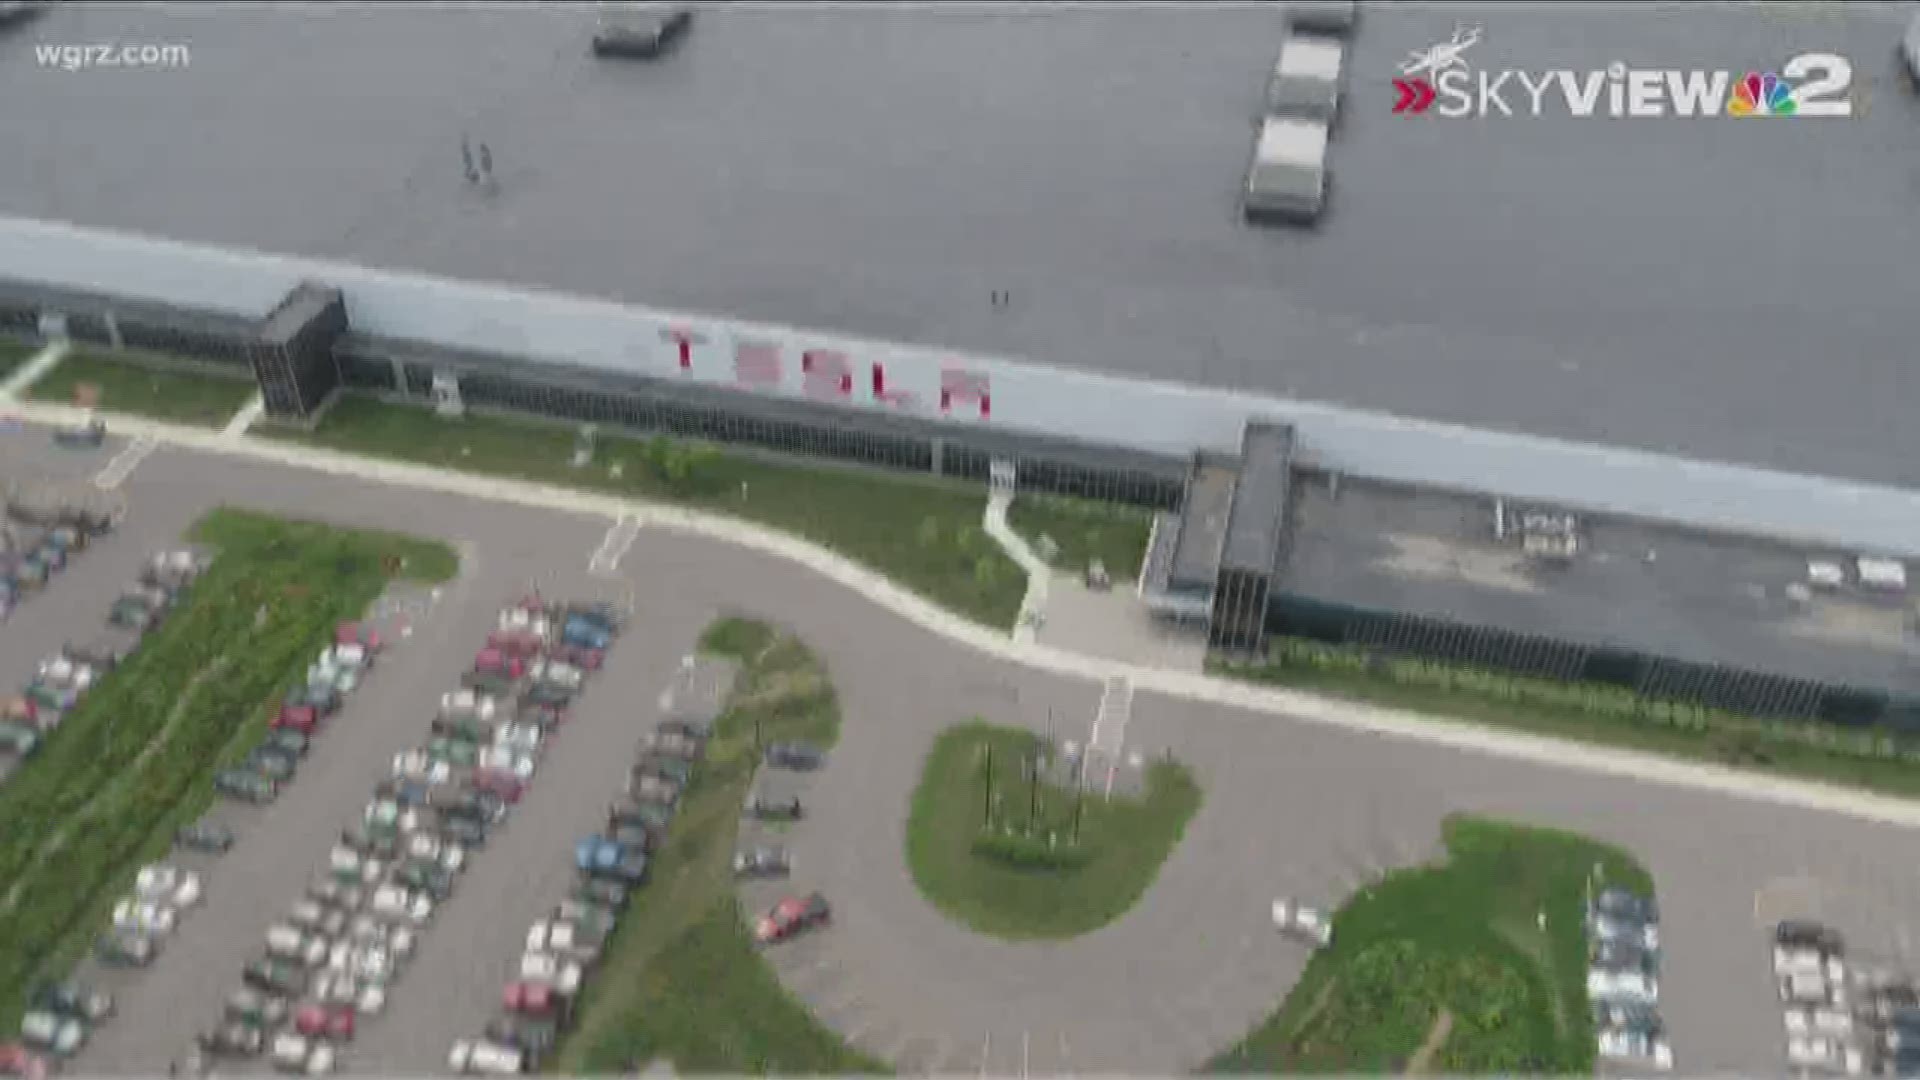 Tesla and Empire State Development have not responded to questions about why the stuff was moved.